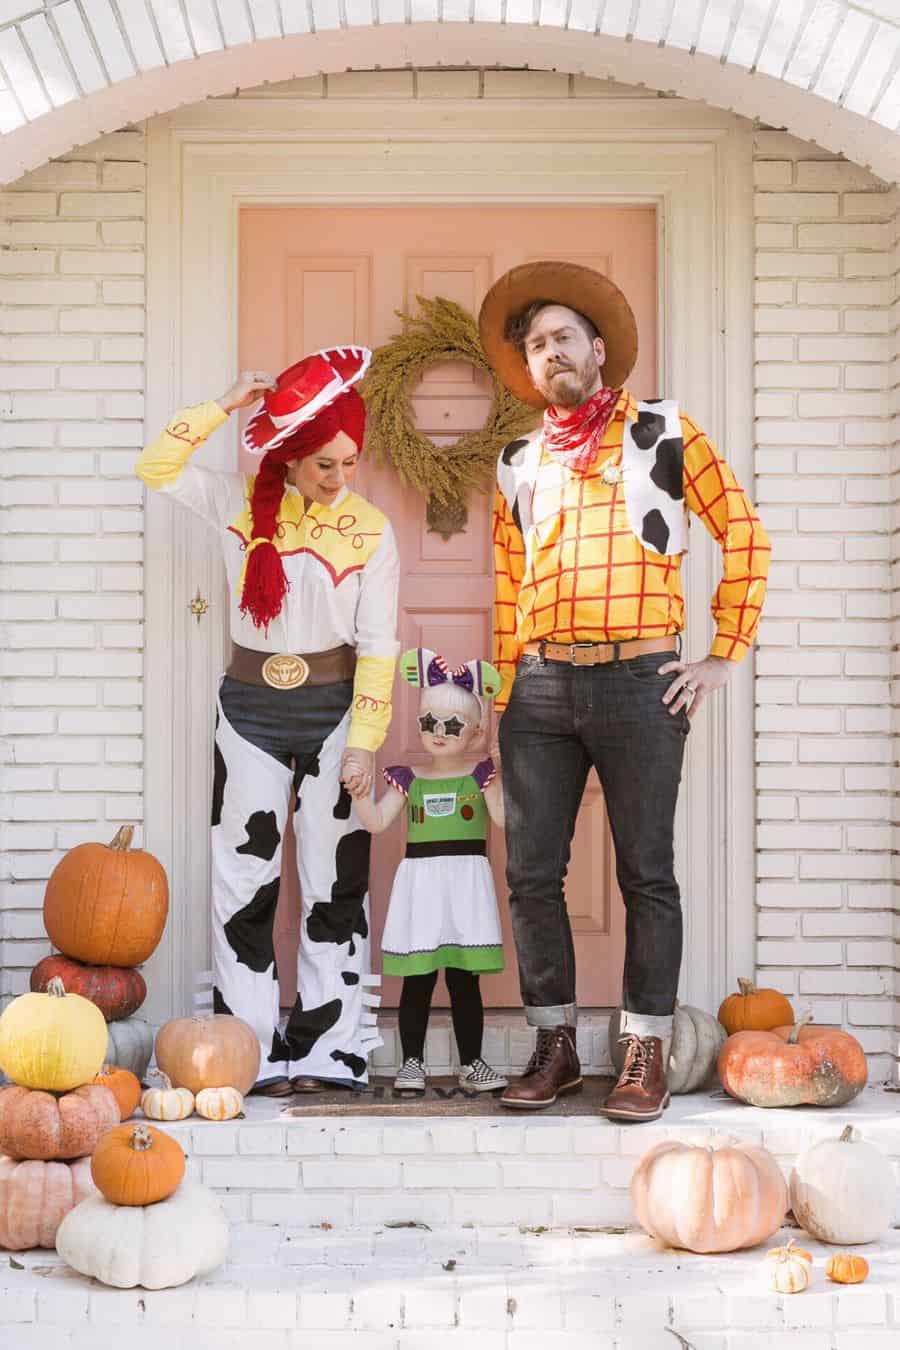 Halloween Costumes From Amazon For The Whole Family! - A Beautiful Mess